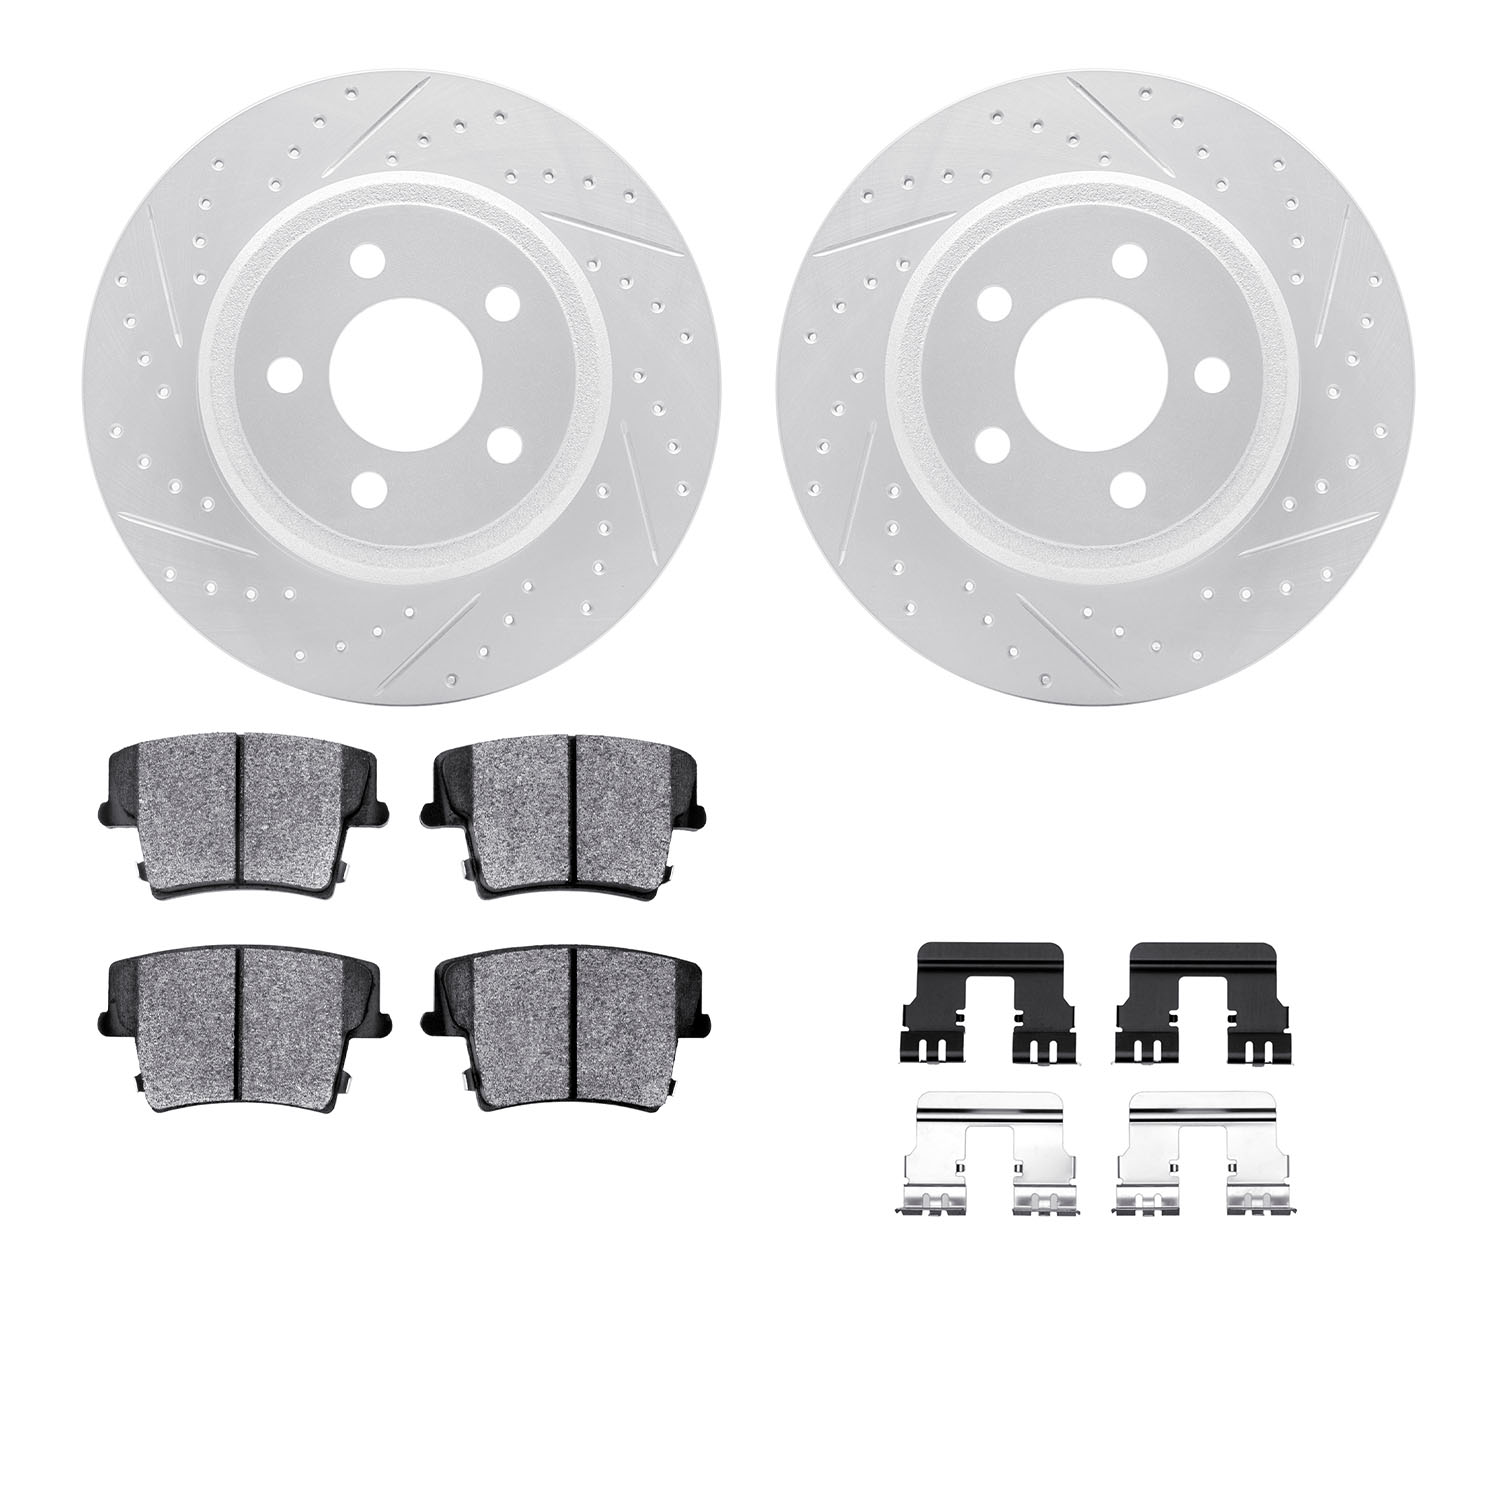 2212-39010 Geoperformance Drilled/Slotted Rotors w/Heavy-Duty Pads Kit & Hardware, Fits Select Mopar, Position: Rear